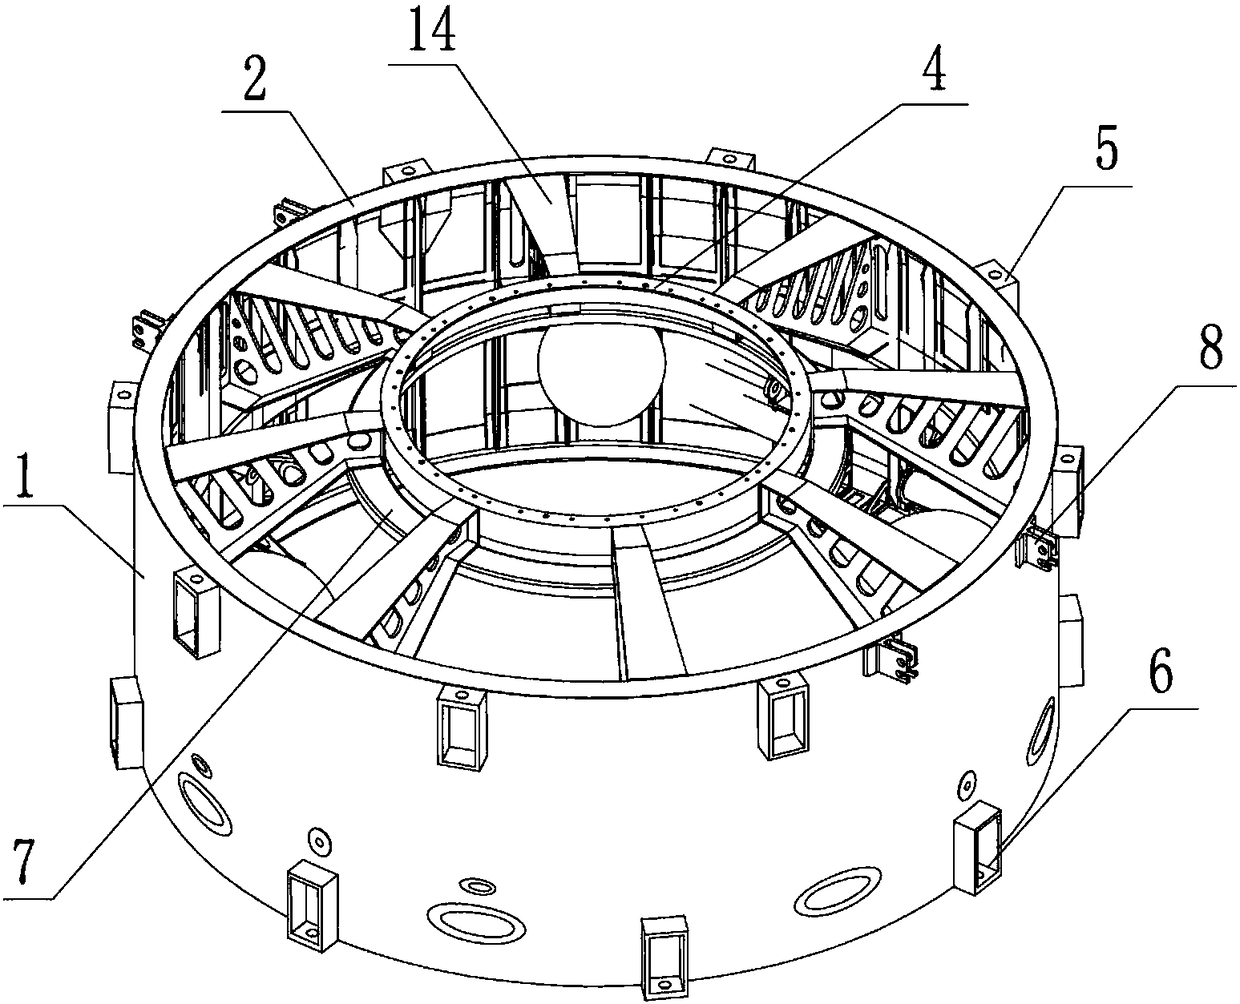 Instrument cabin structure of a carrier